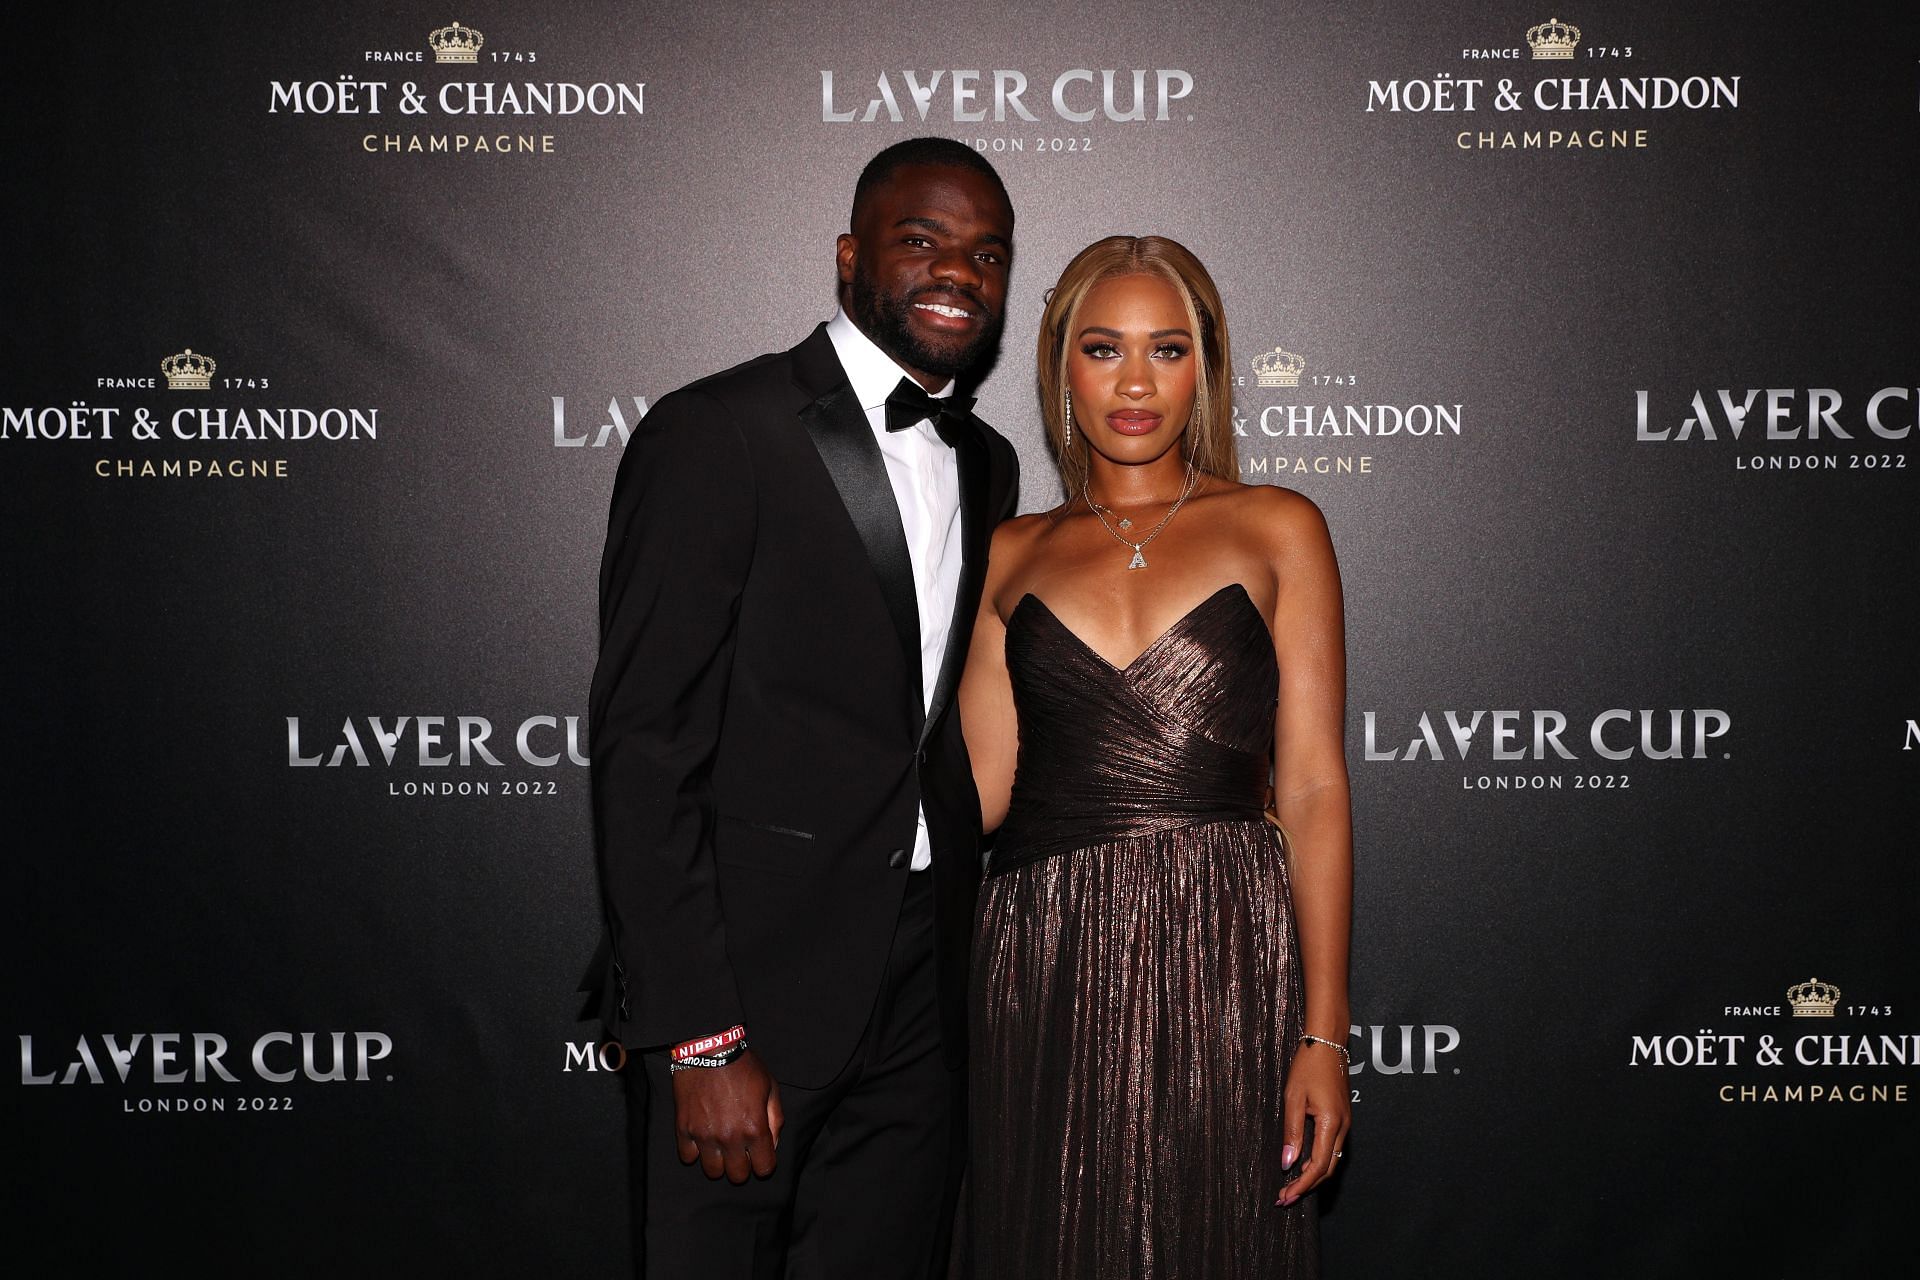 “Sheeesh” - Frances Tiafoe gushes over girlfriend Ayan Broomfield’s latest photoshoot for Essence